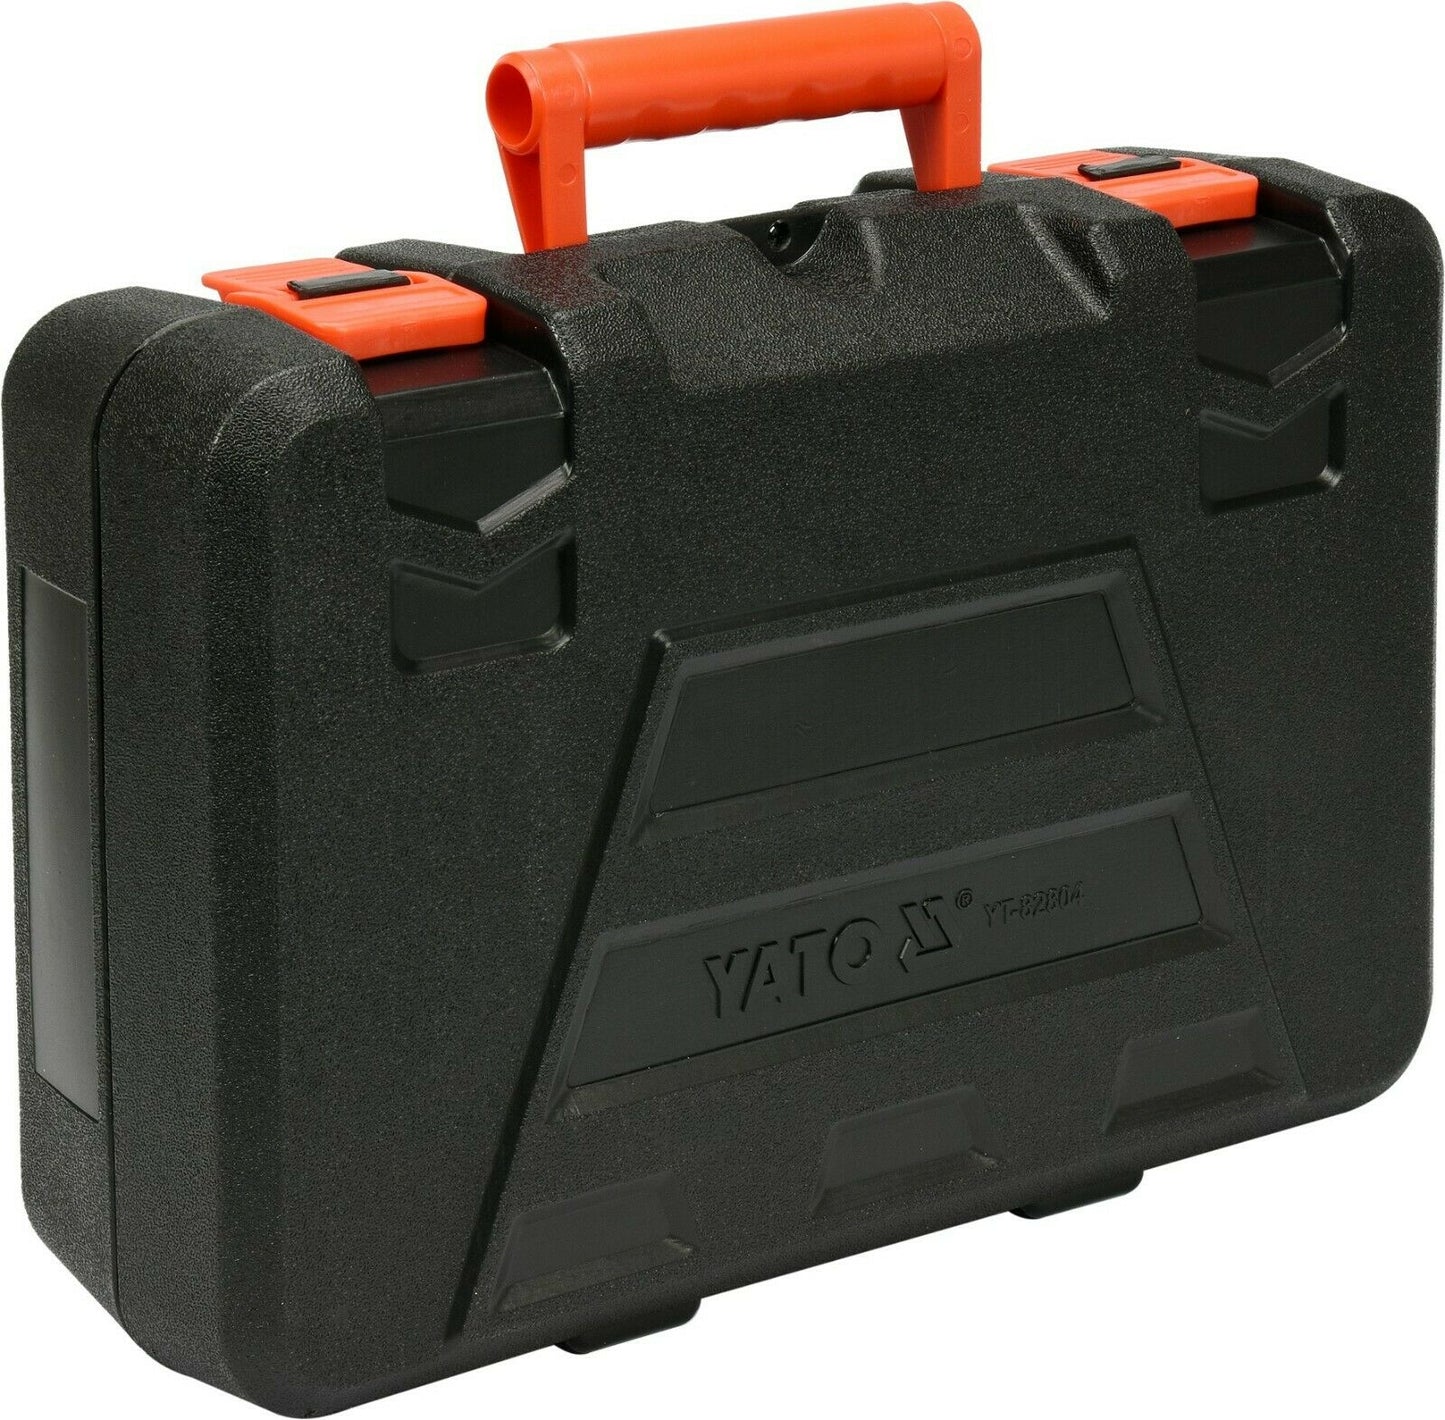 Yato battery pitcher 300NM cordless screwdriver charger screwer accu yt-82804